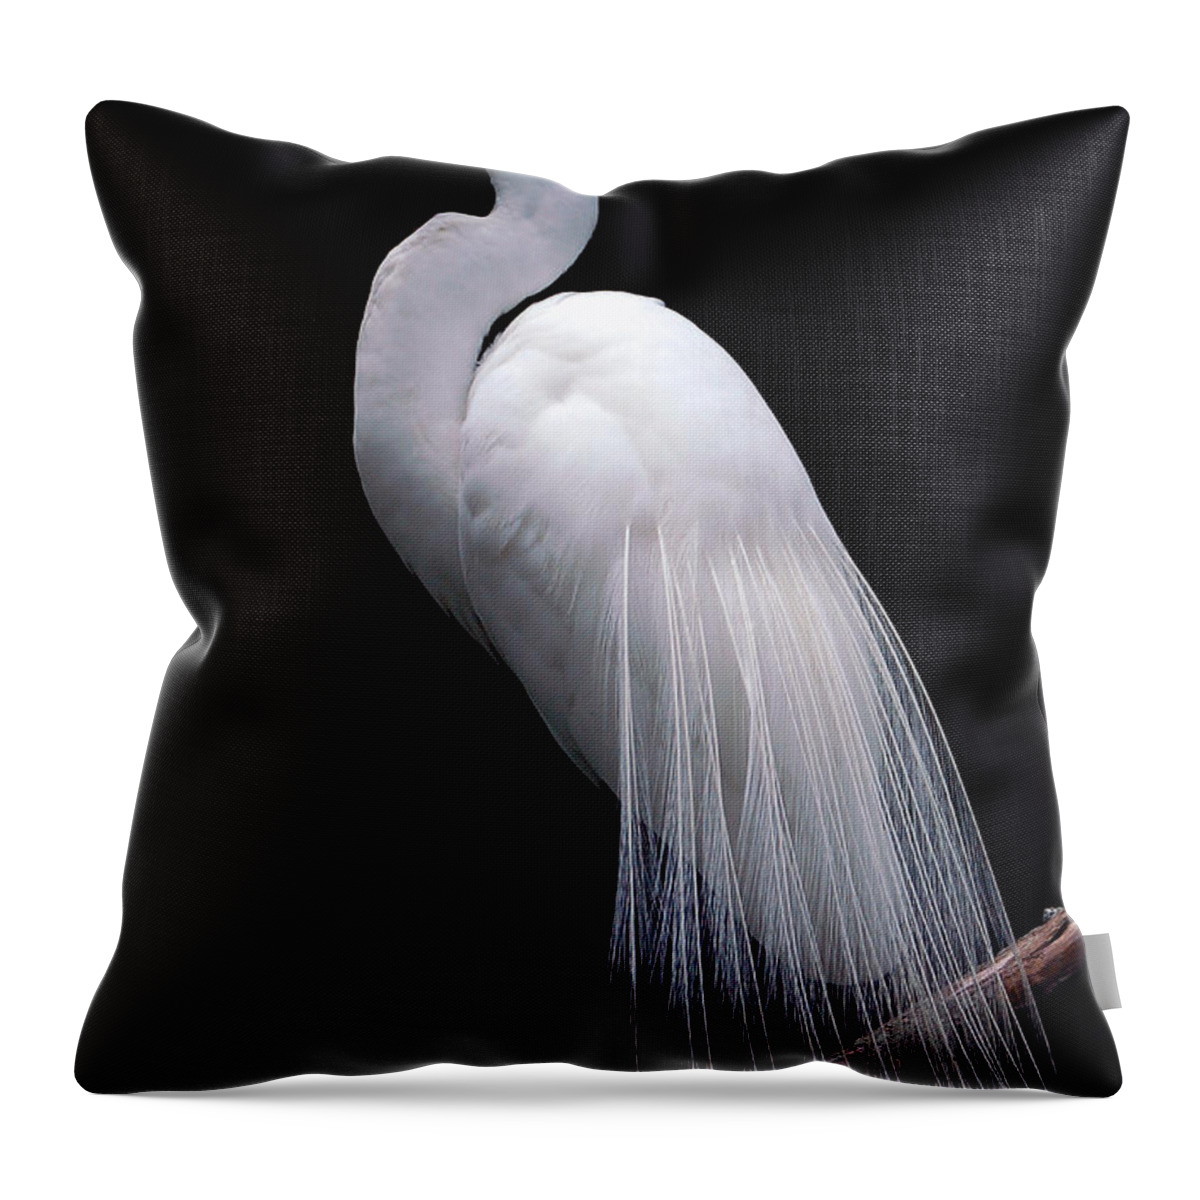 Egret Throw Pillow featuring the photograph Great Egret II by Donna Proctor